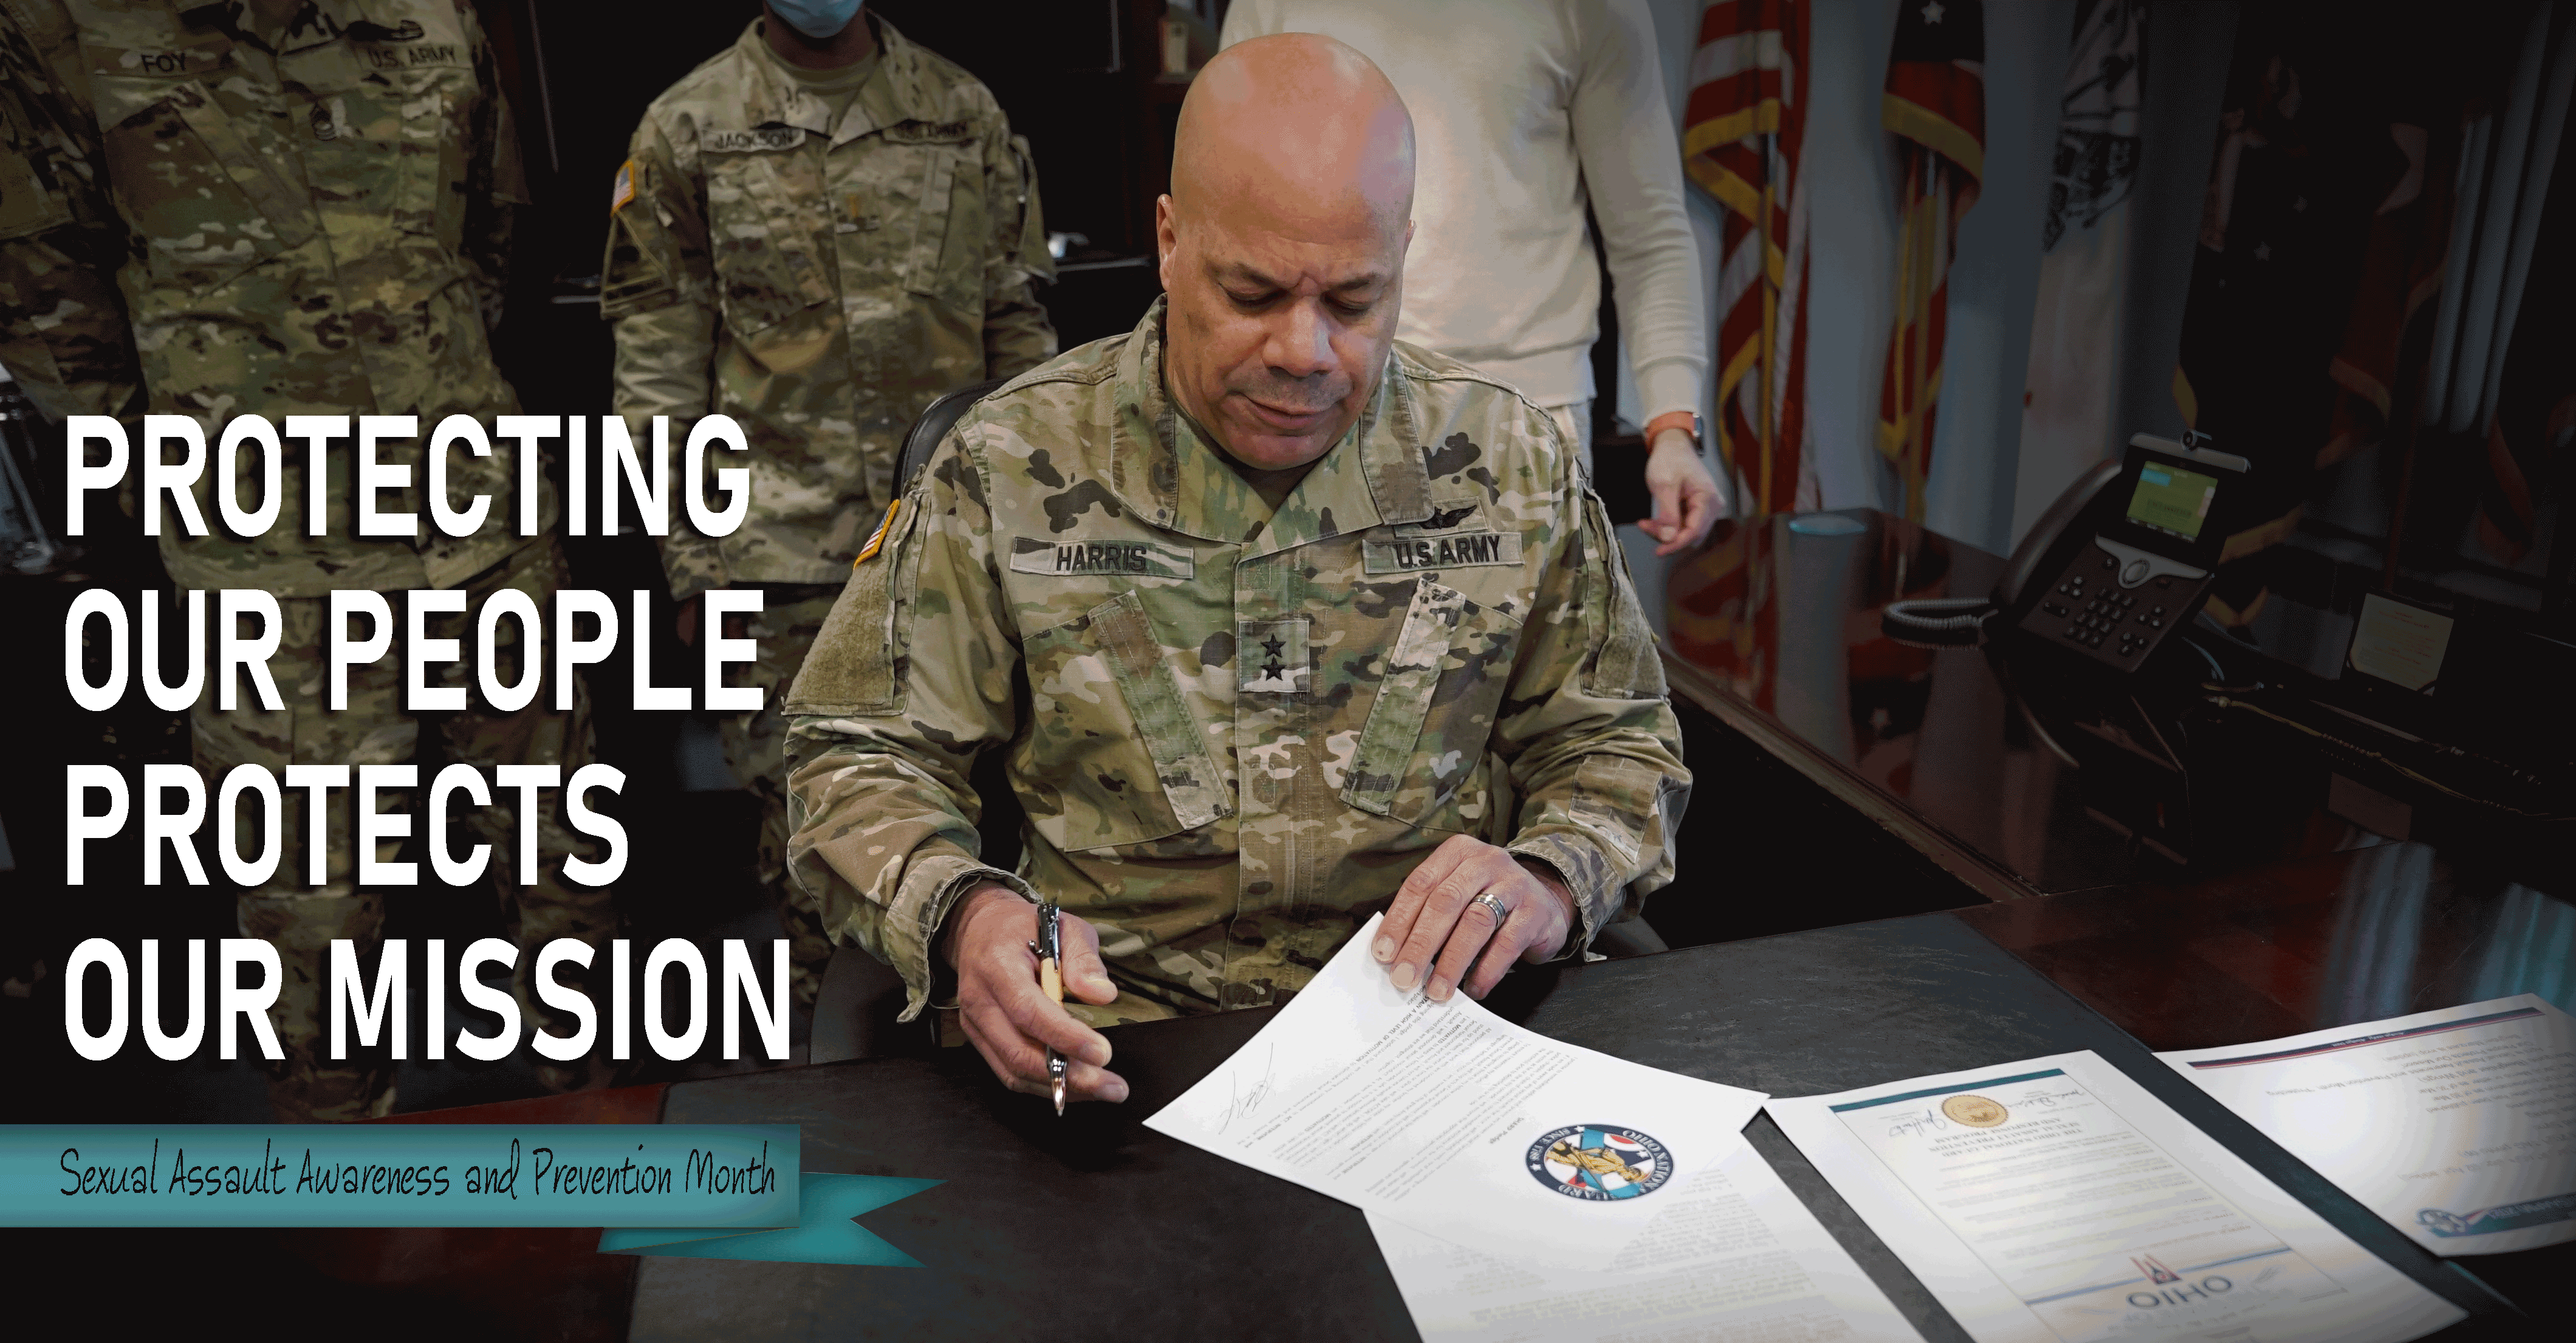 Ohio Adjutant General signs documents on  his desk as Guard Members stand behind.